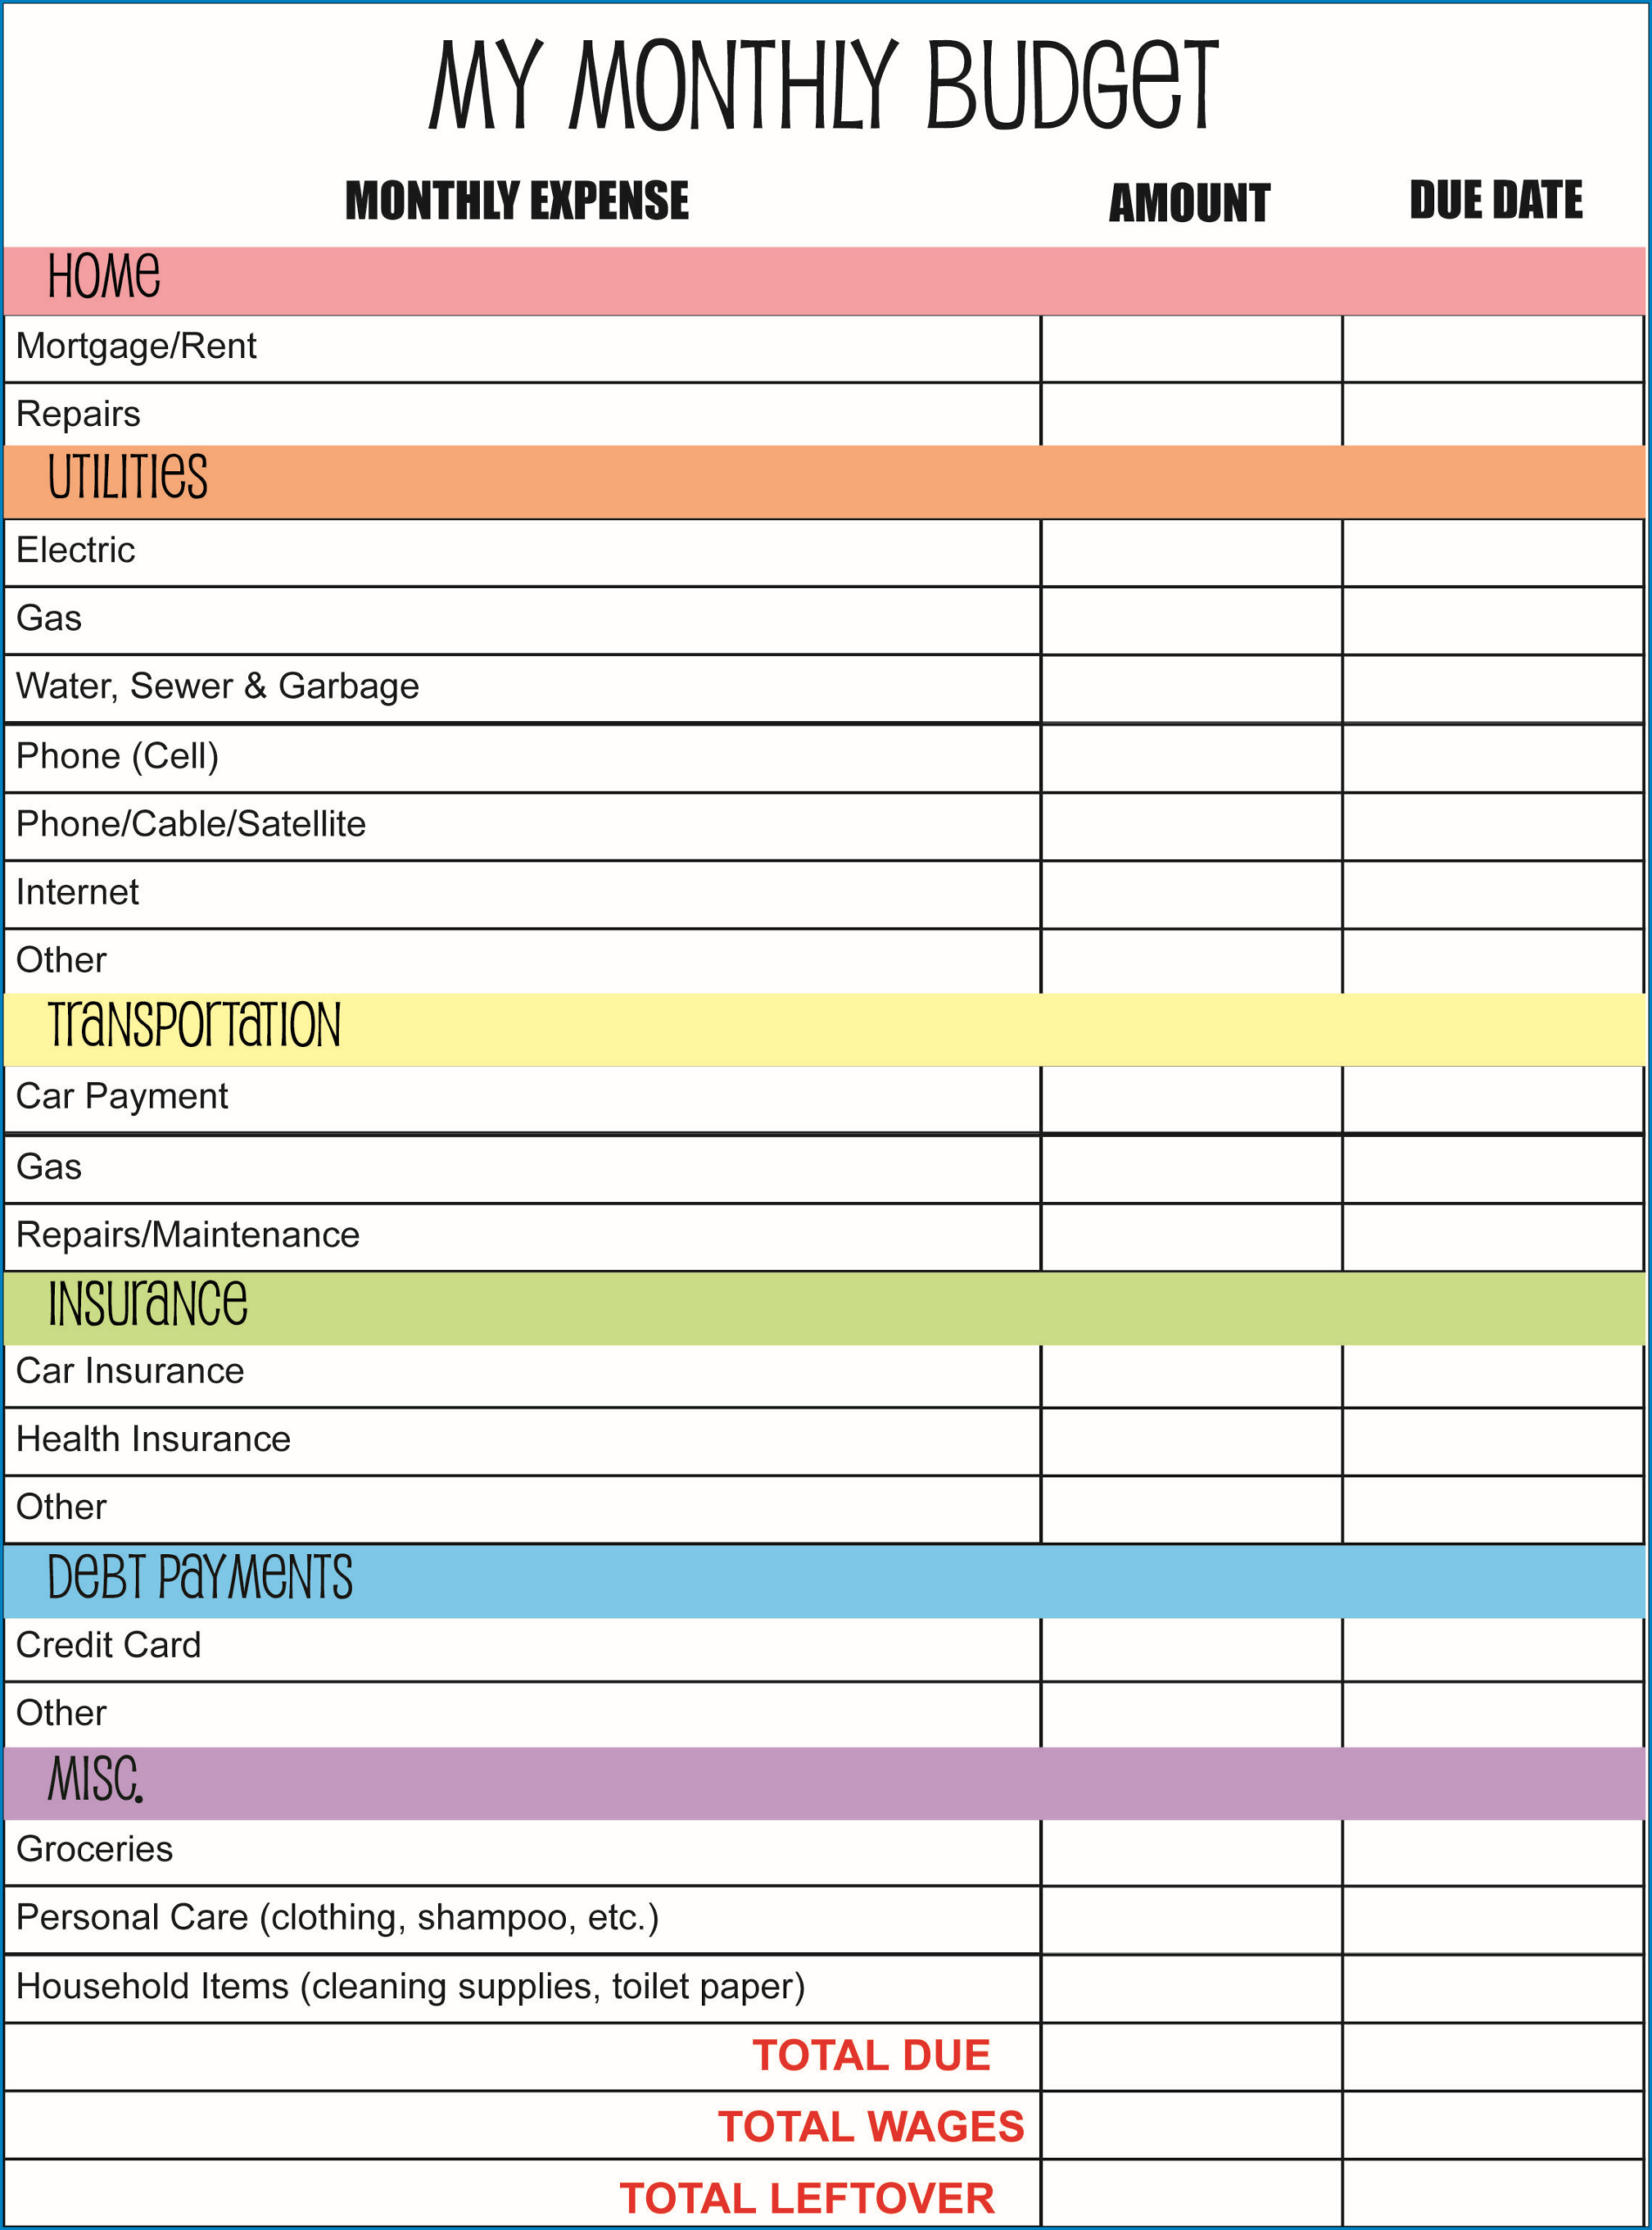 P/Printable Monthly Budget Planner Template | Template intended for Budget Planner Worksheet Pdf